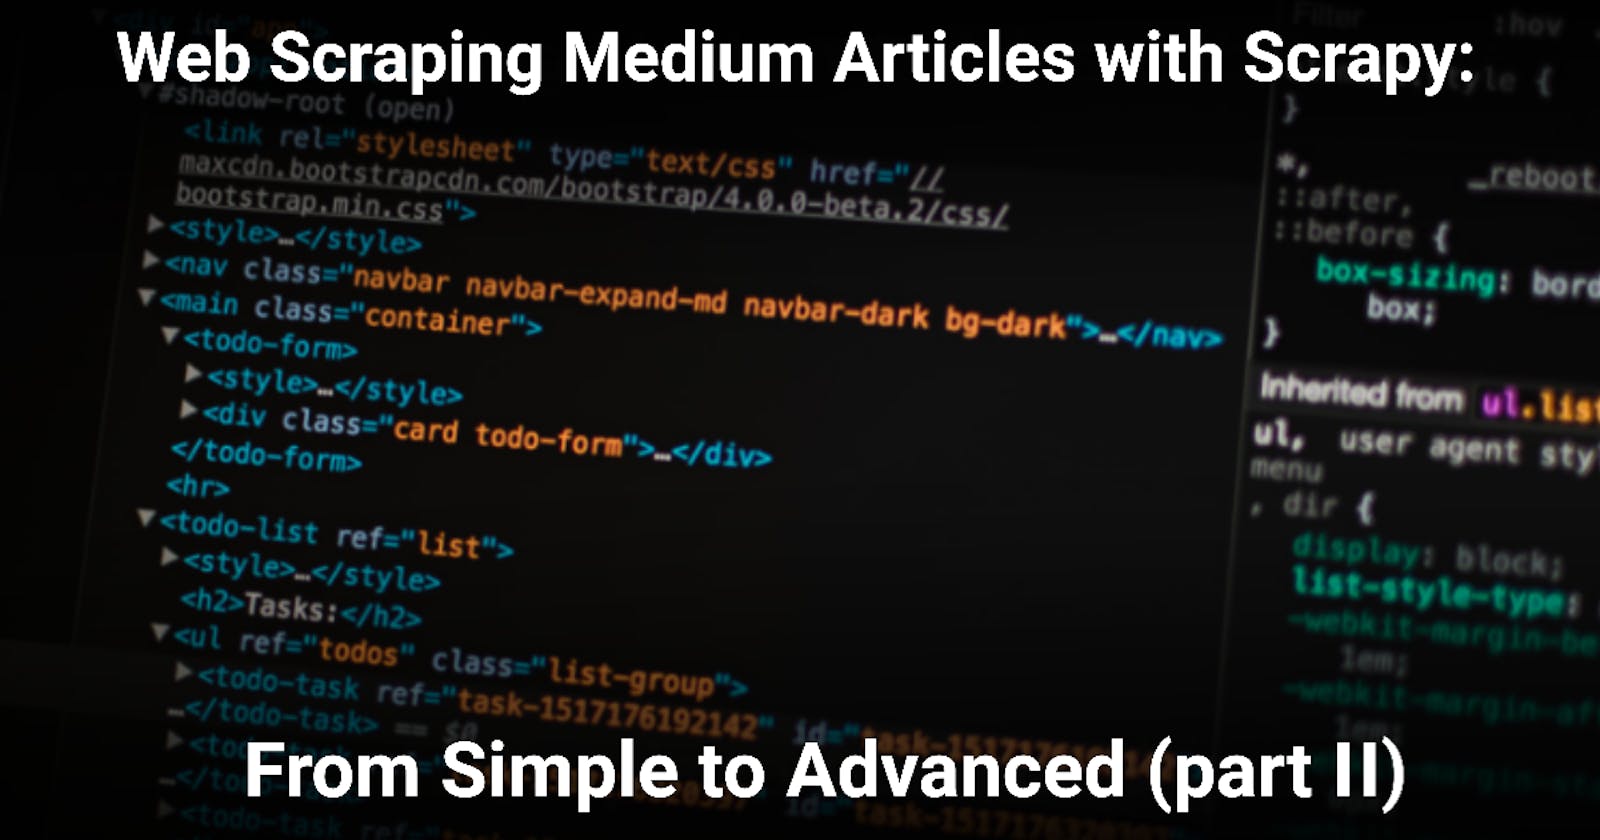 Web Scraping Medium Articles with Scrapy: From Simple to Advanced (part II)